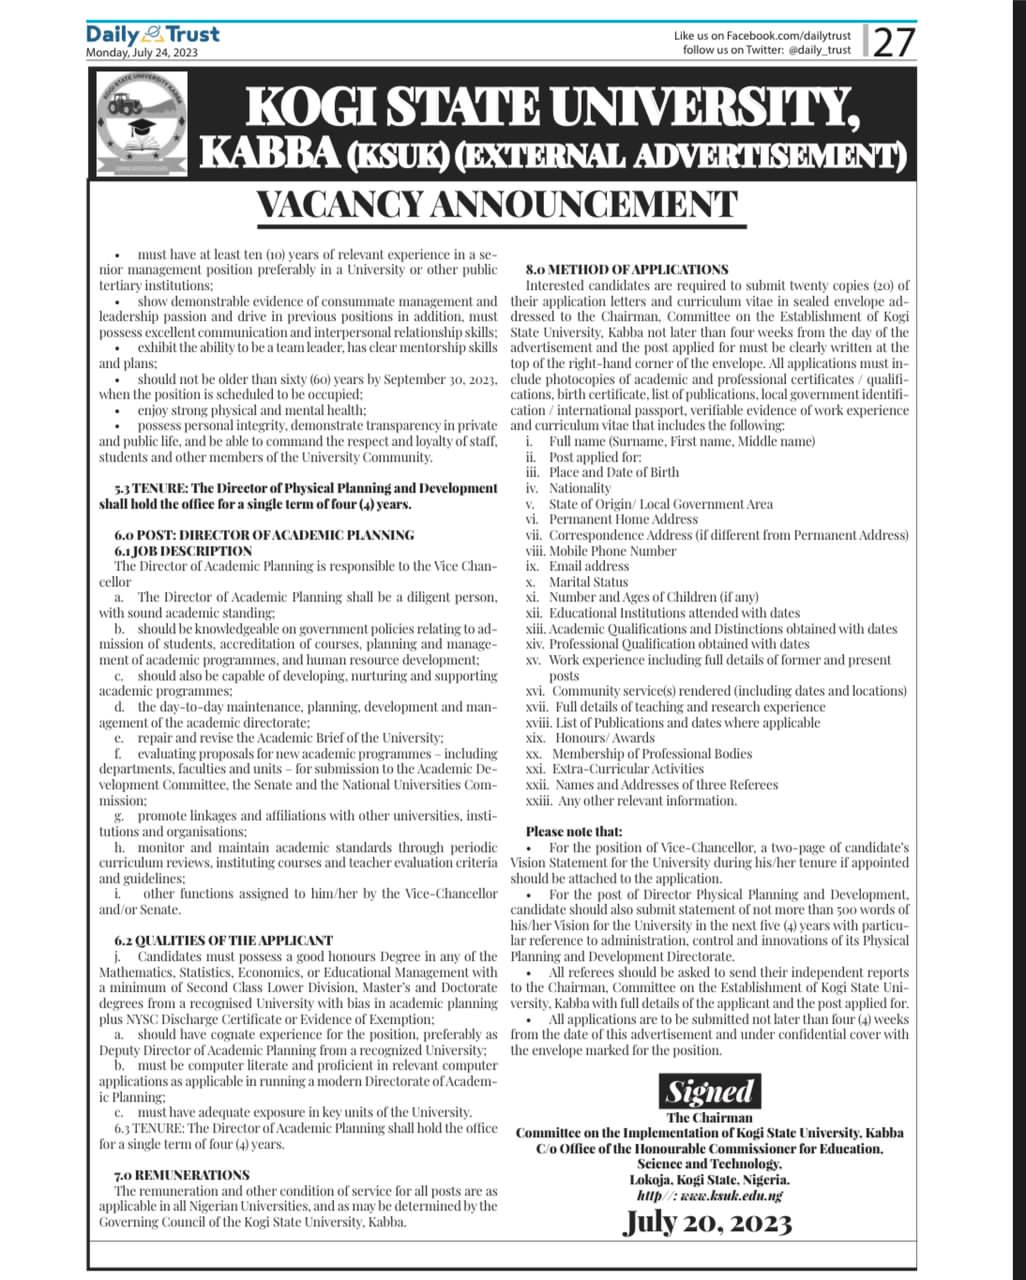 Kogi State University, Kabba Announces External Advertisement For It’s Principal Officers